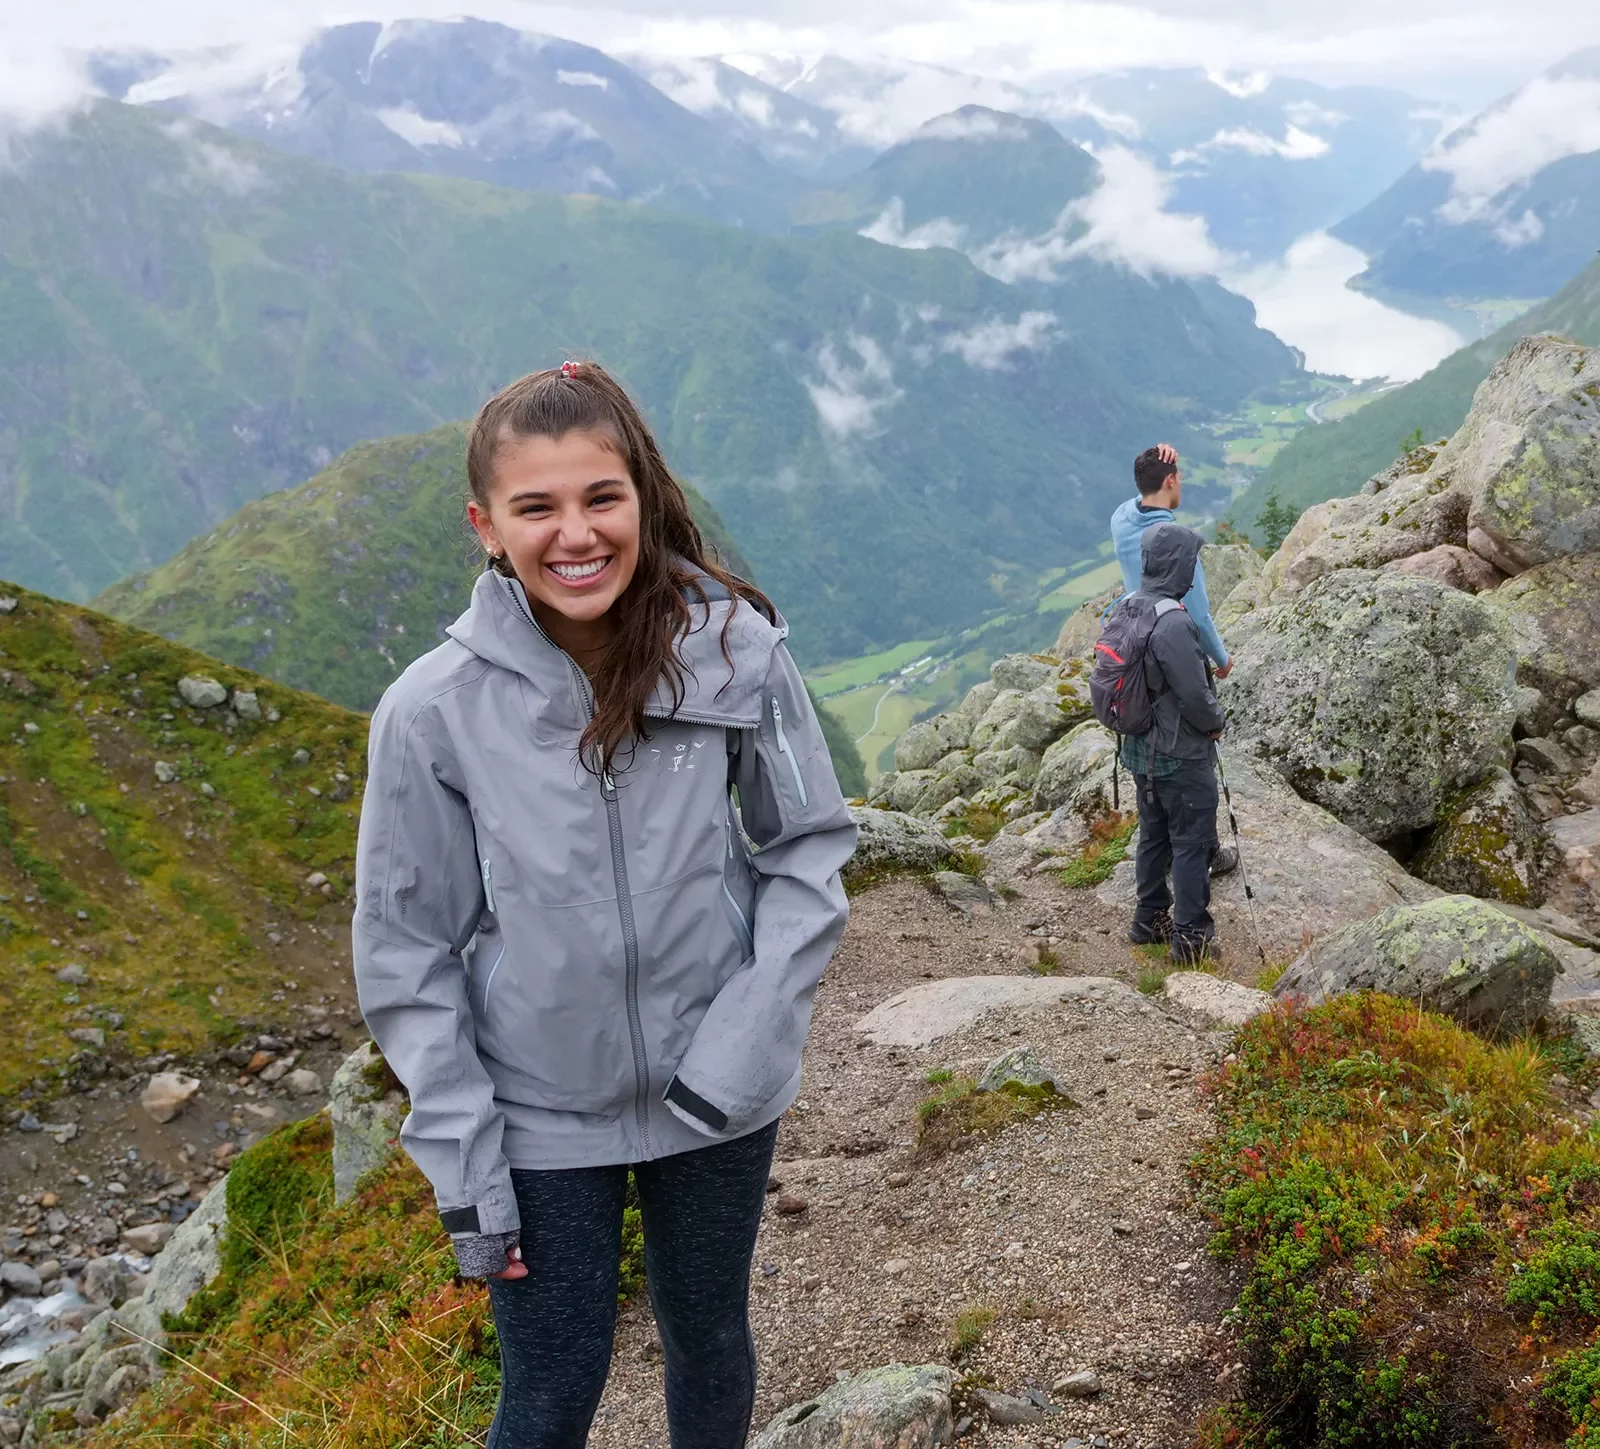 Teenage girl laughing and smiling while hiking in Norway